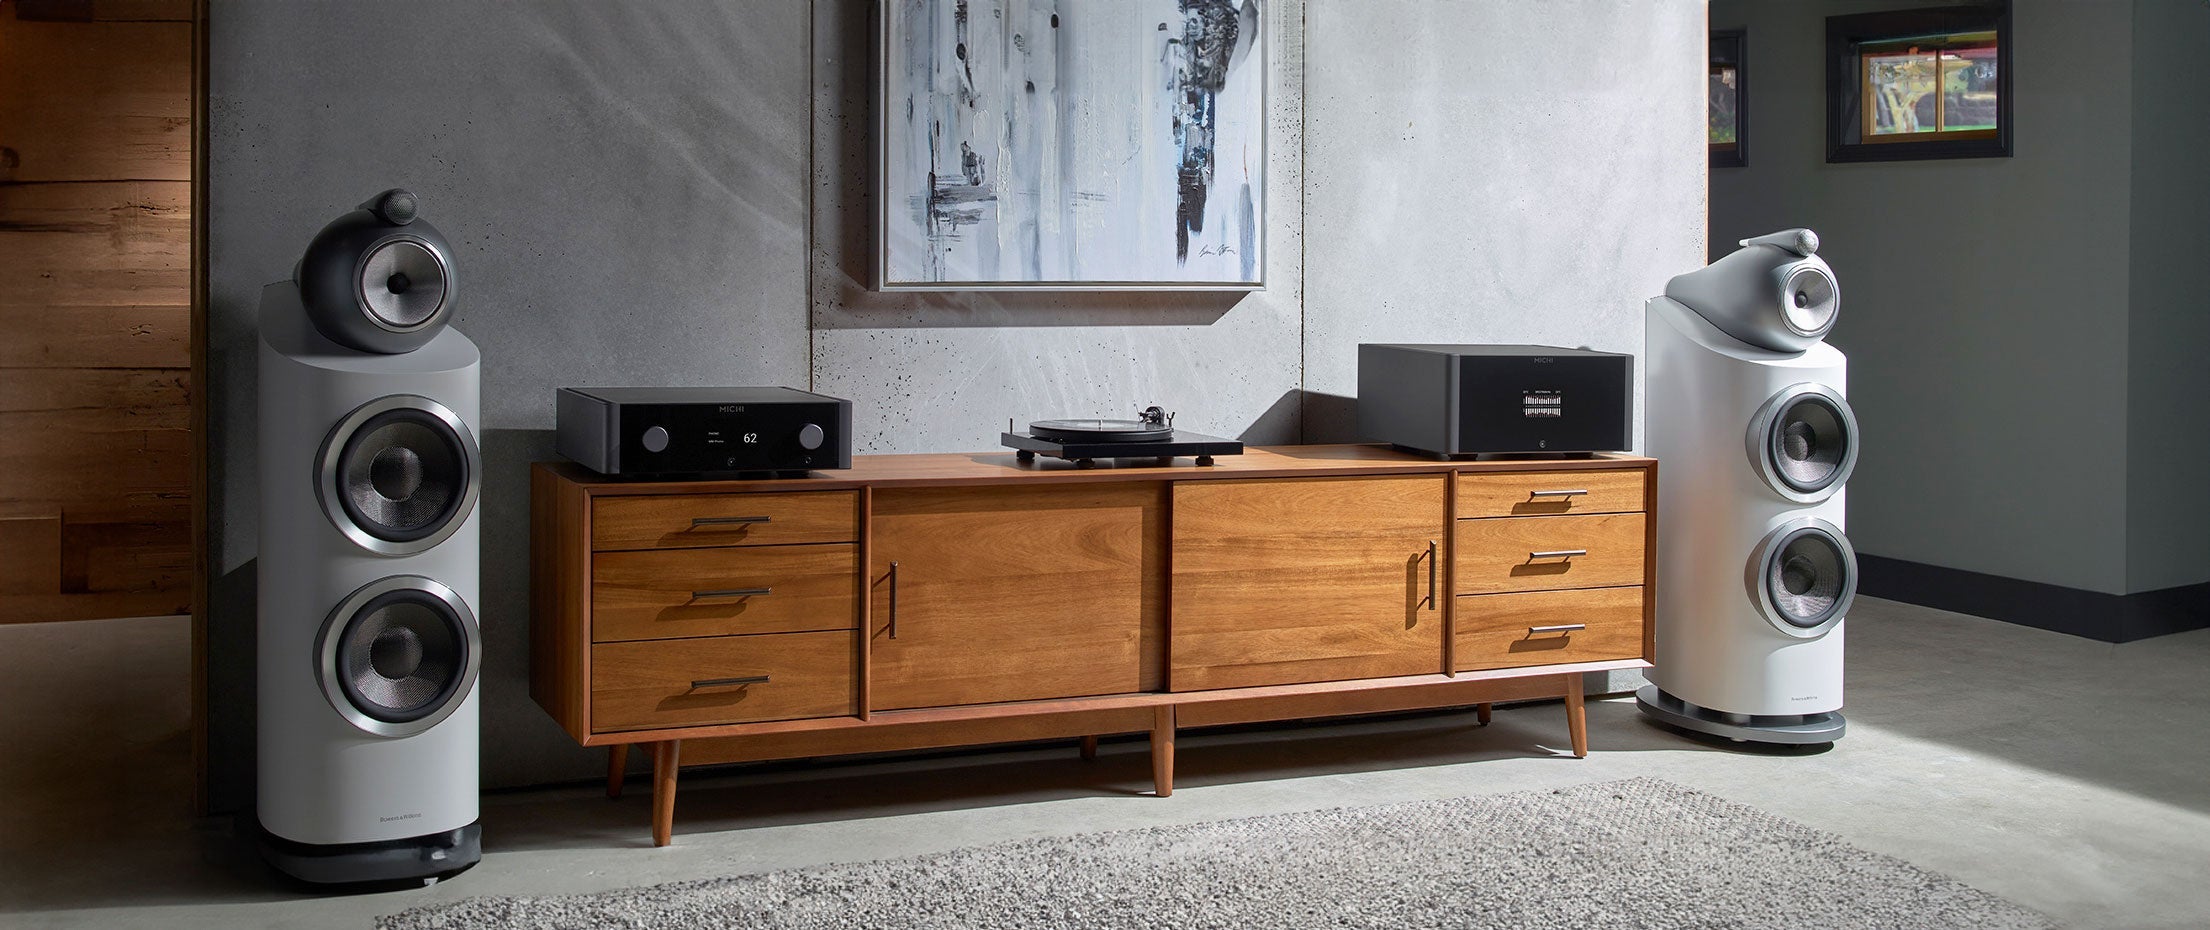 Professional audio system with floor-standing speakers, a/v receiver, and turntable.